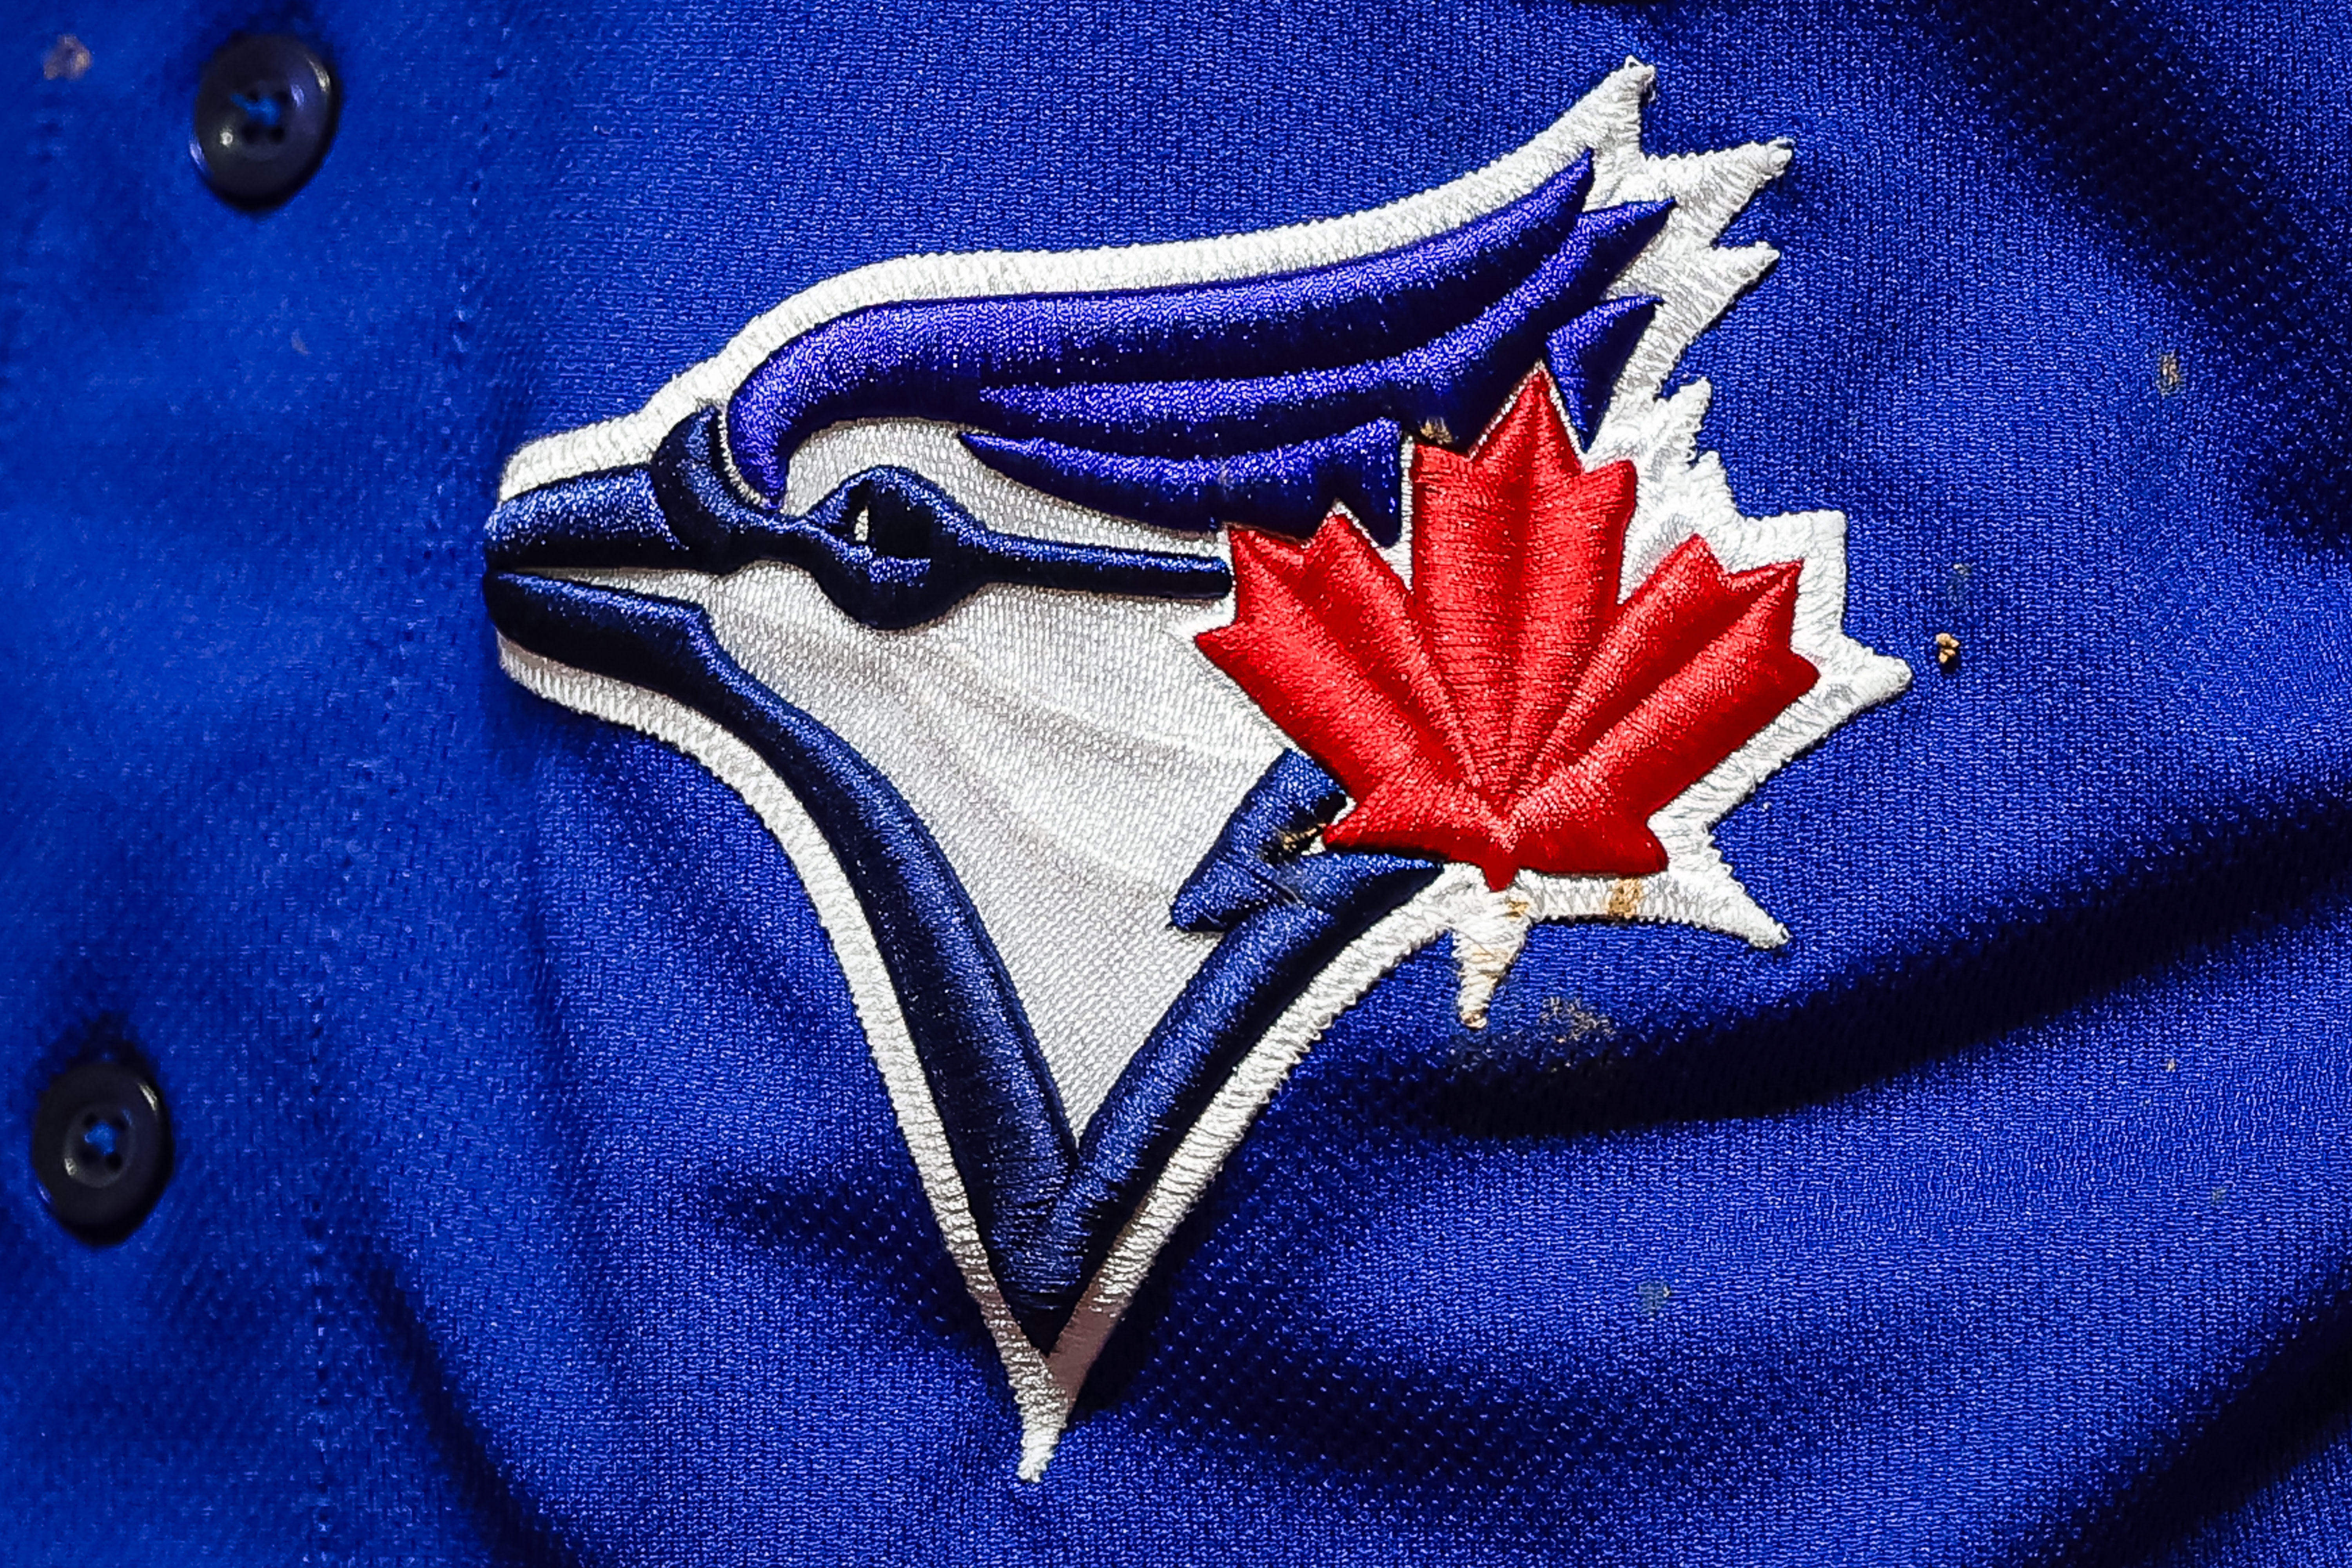 IMO These are the best caps the Blue Jays ever had : r/Torontobluejays